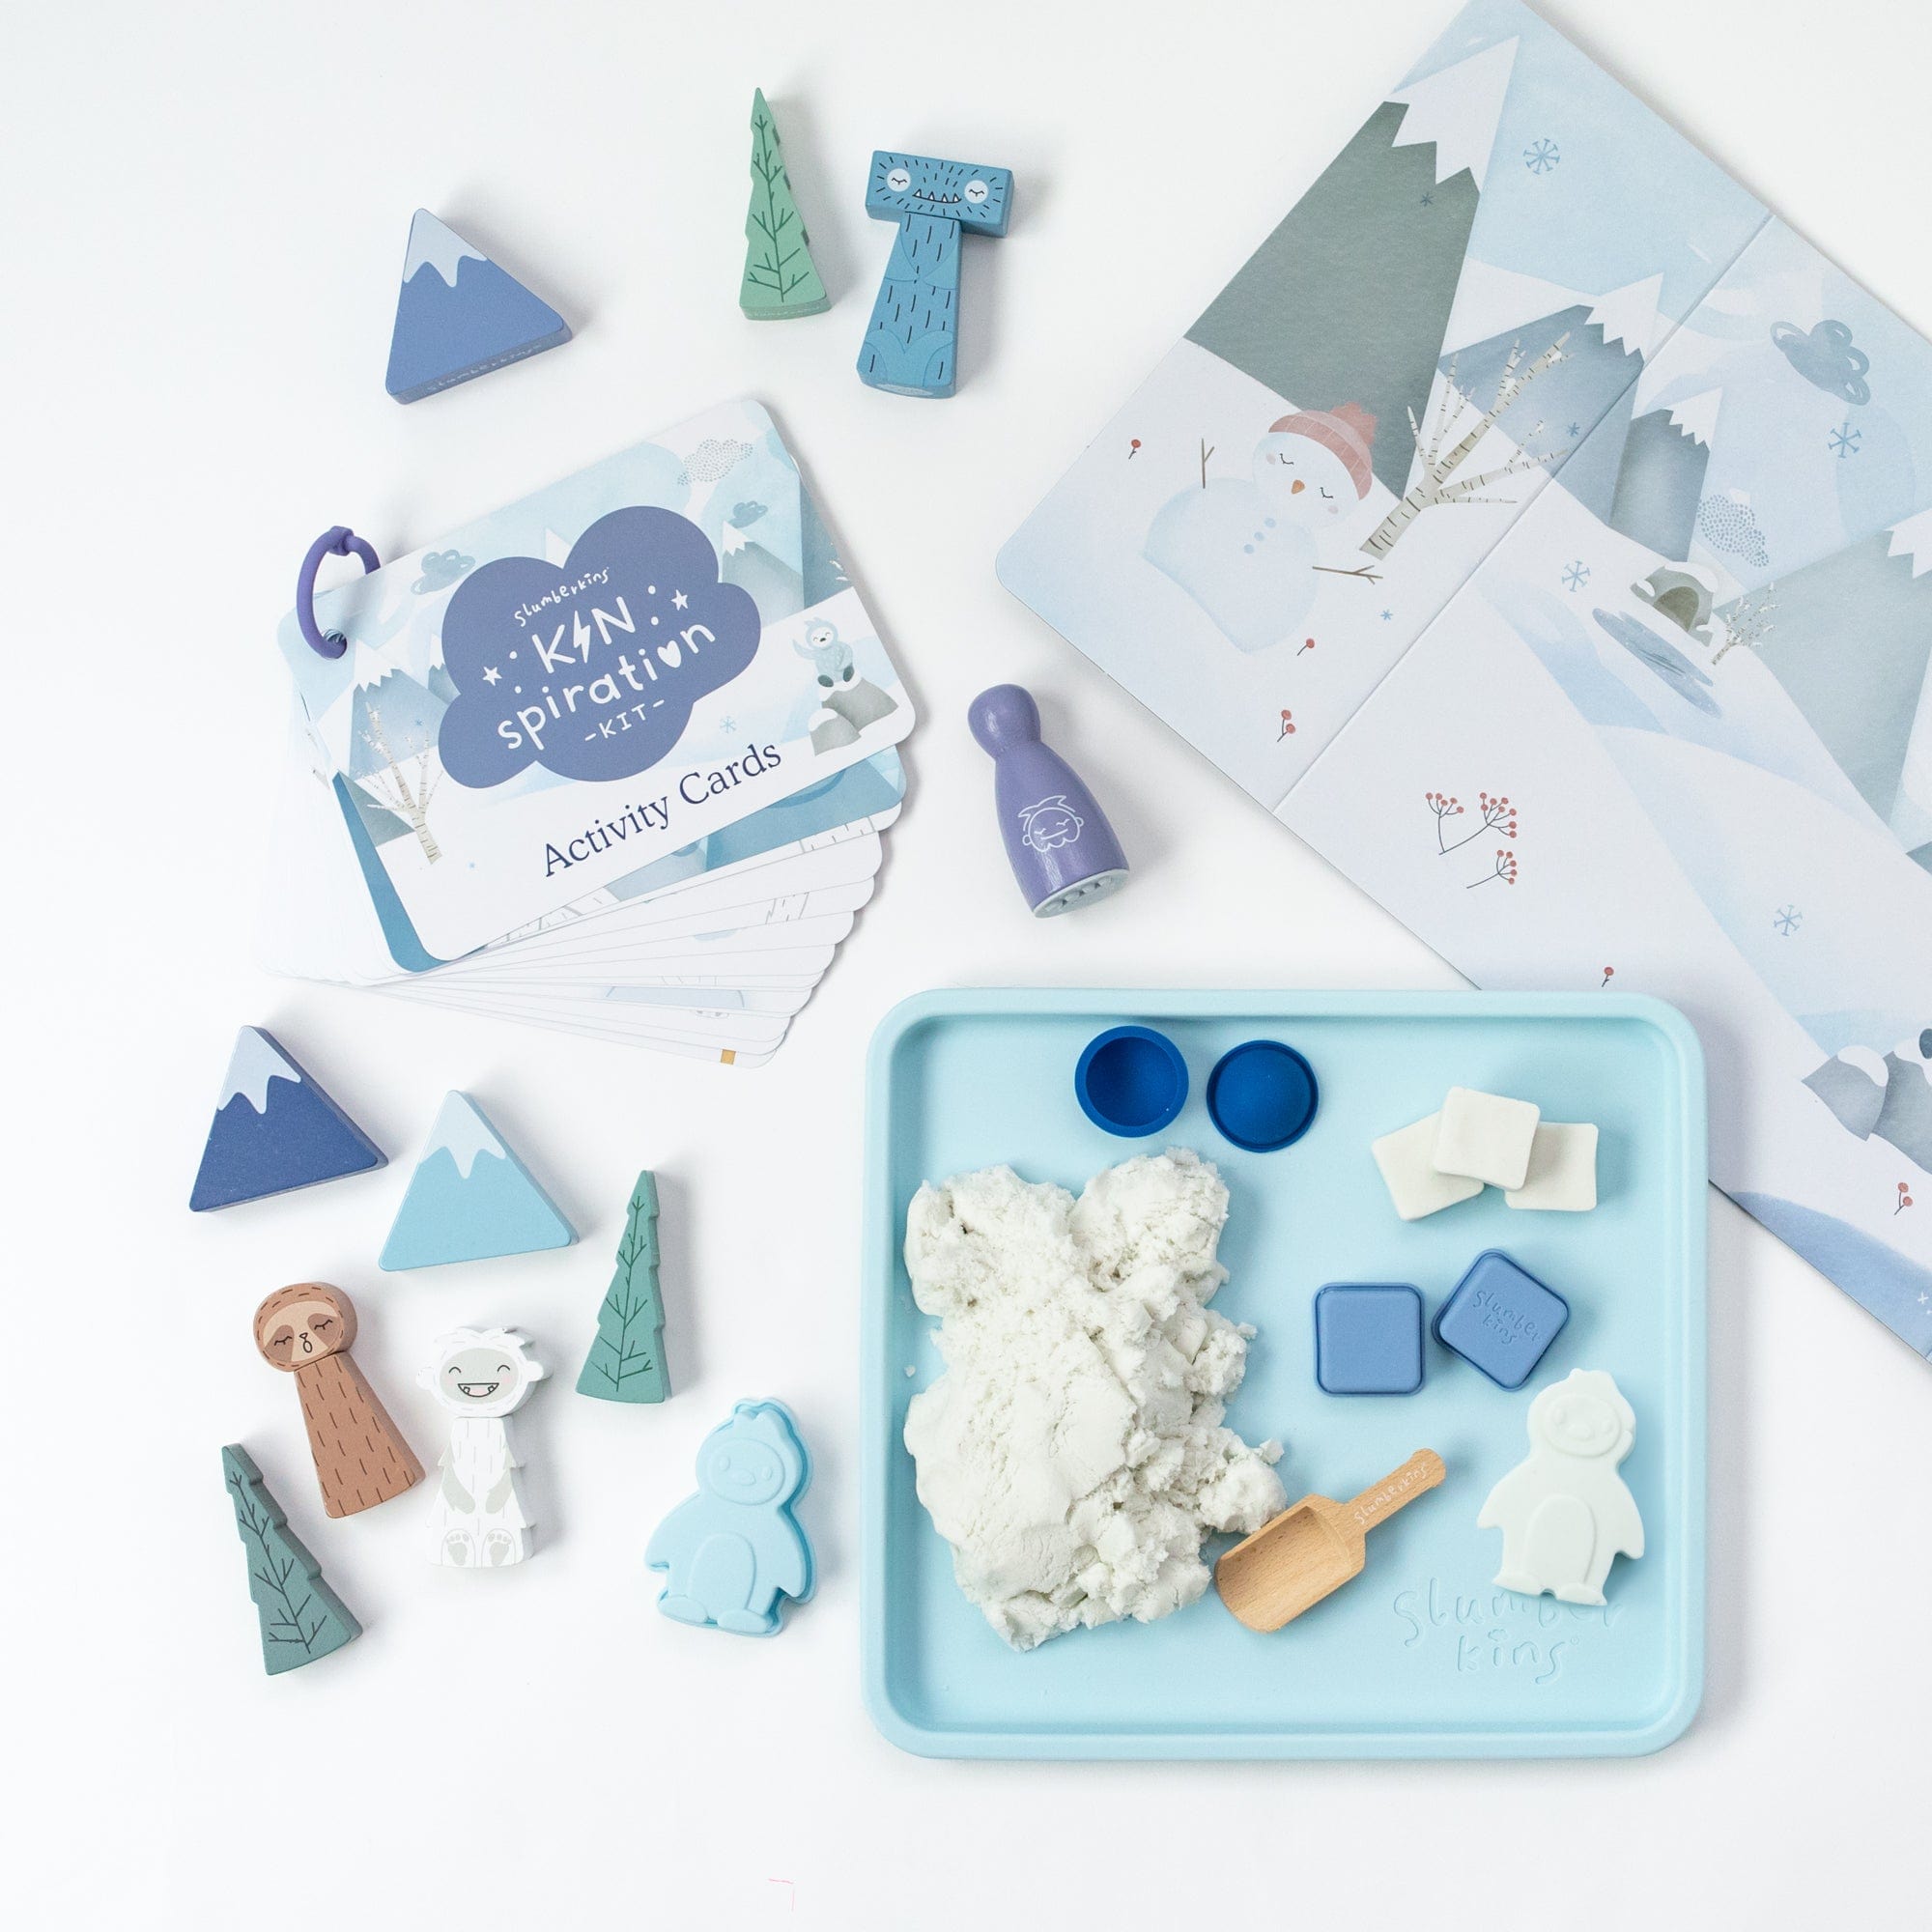 Kinspiration Kit: Mindful Play with Yeti - View Product